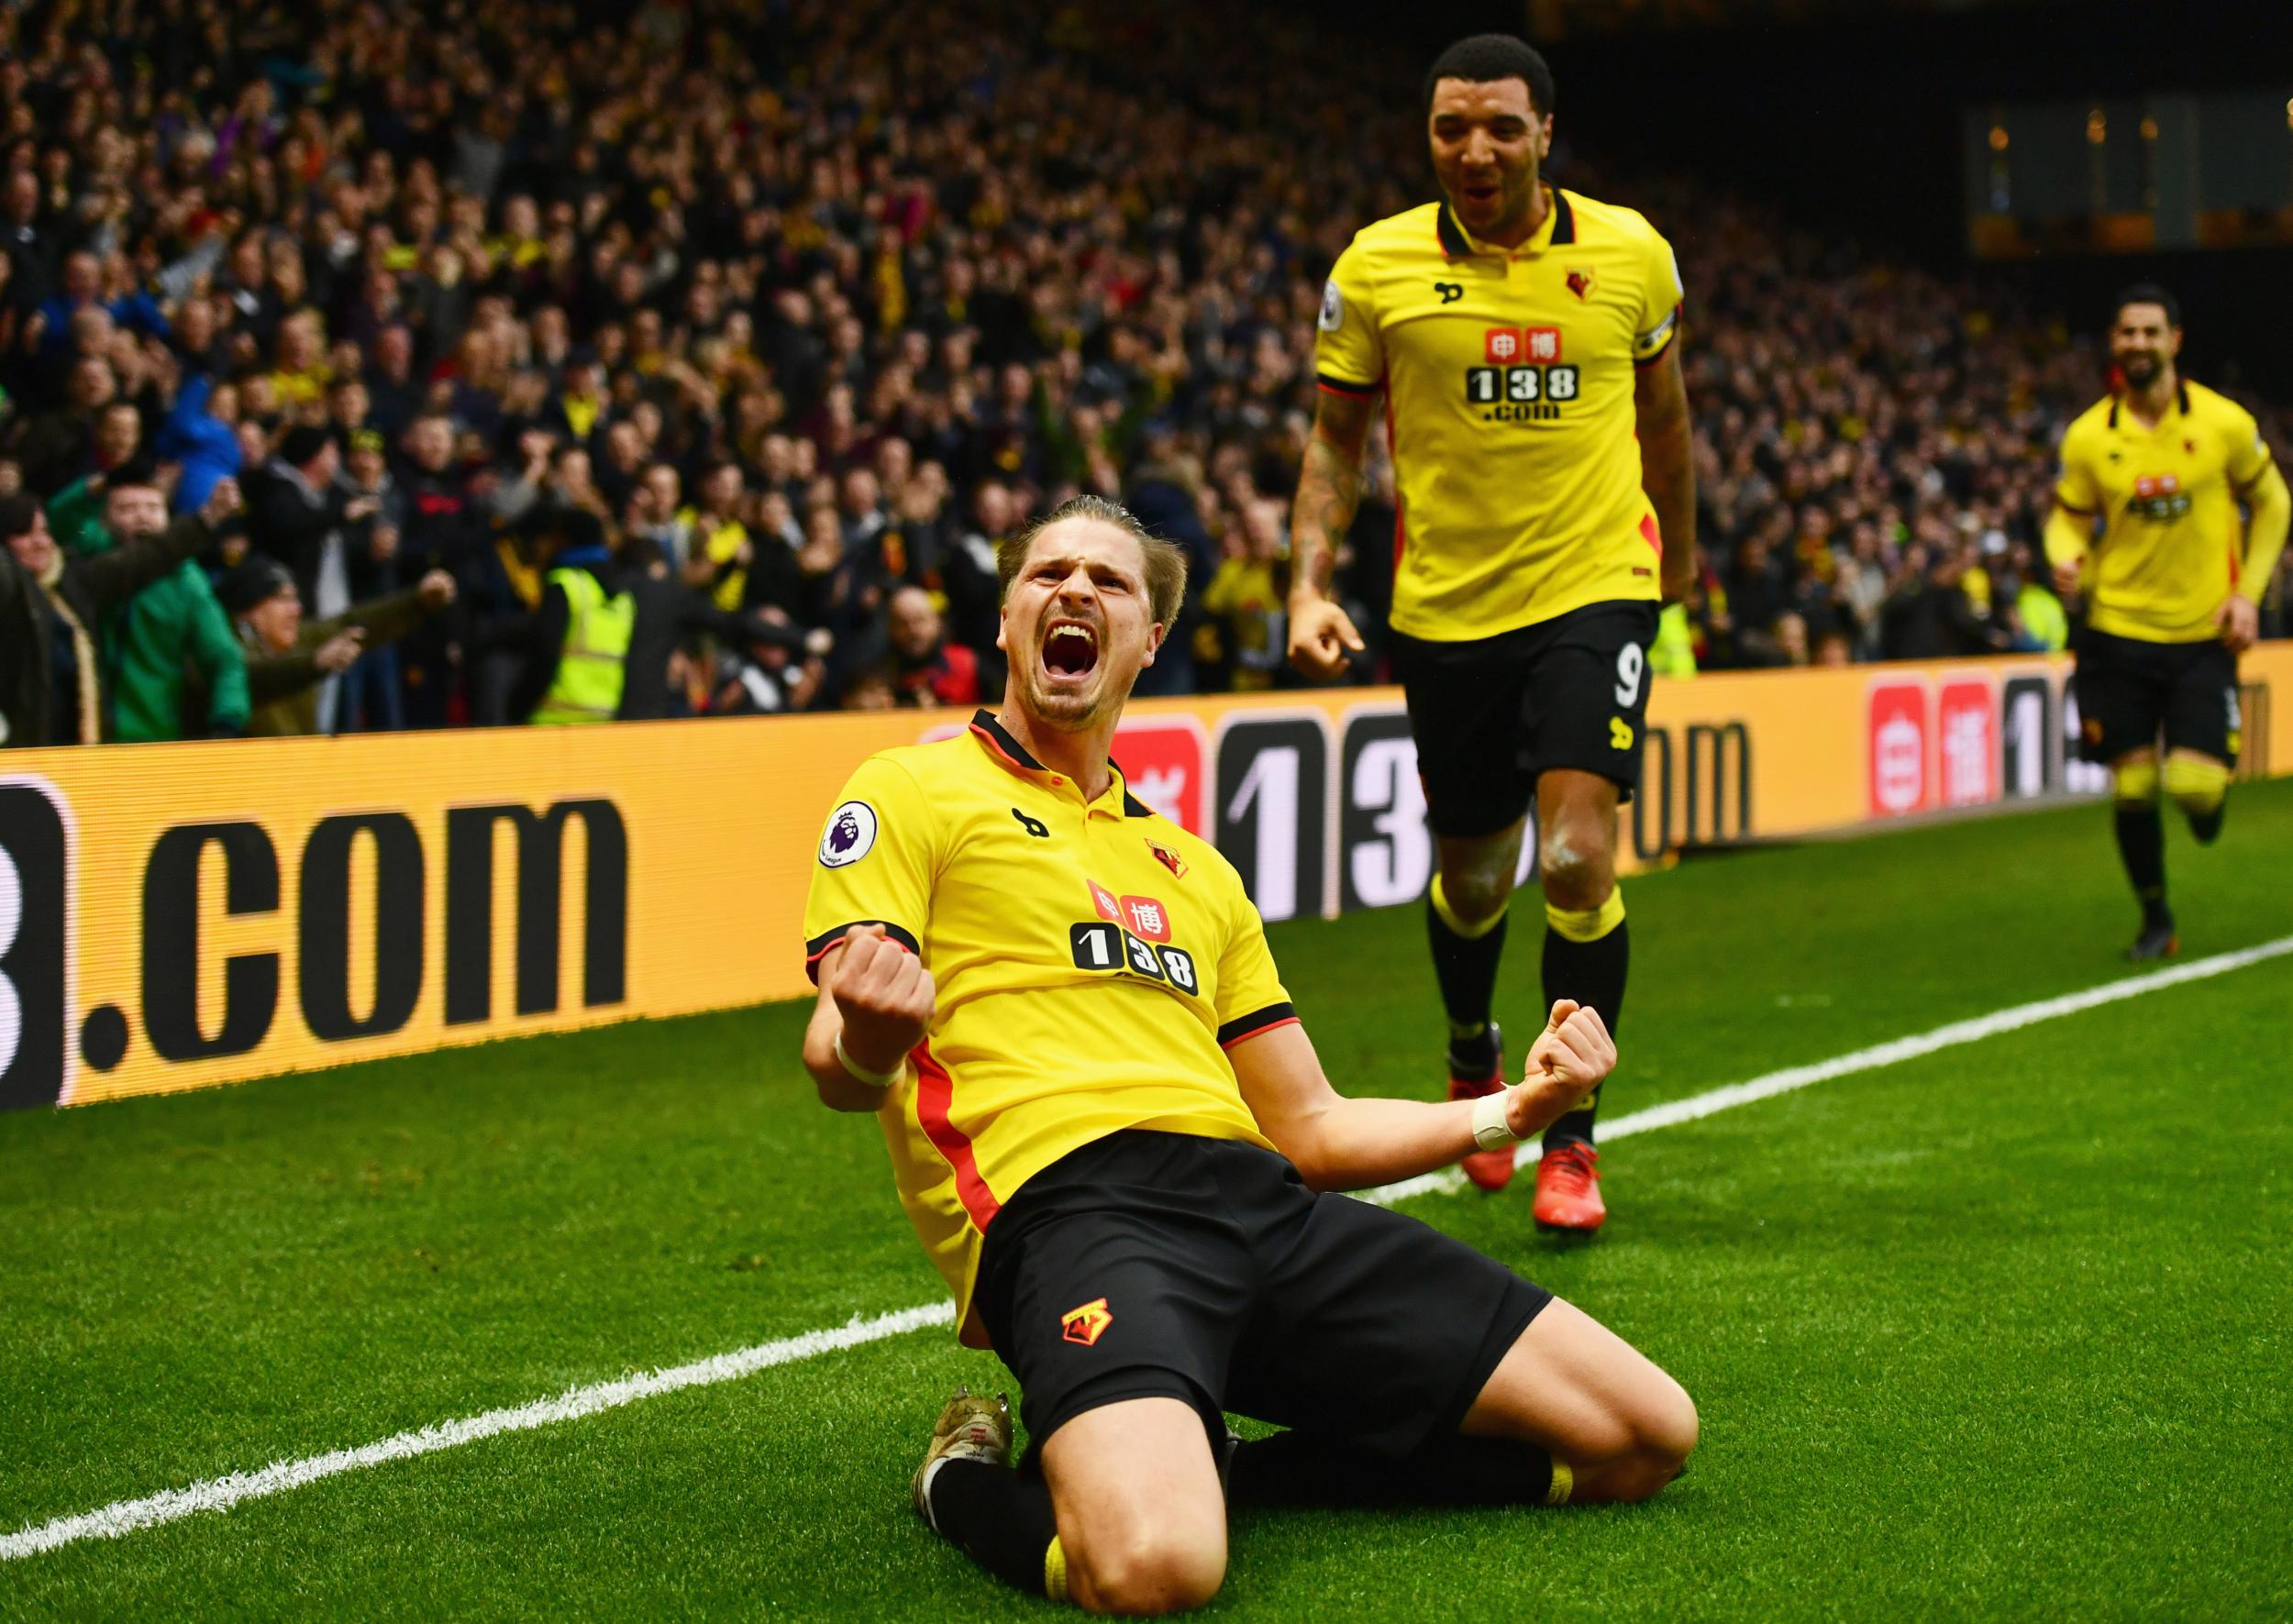 Watford will hope to improve on last season's 17th-place finish